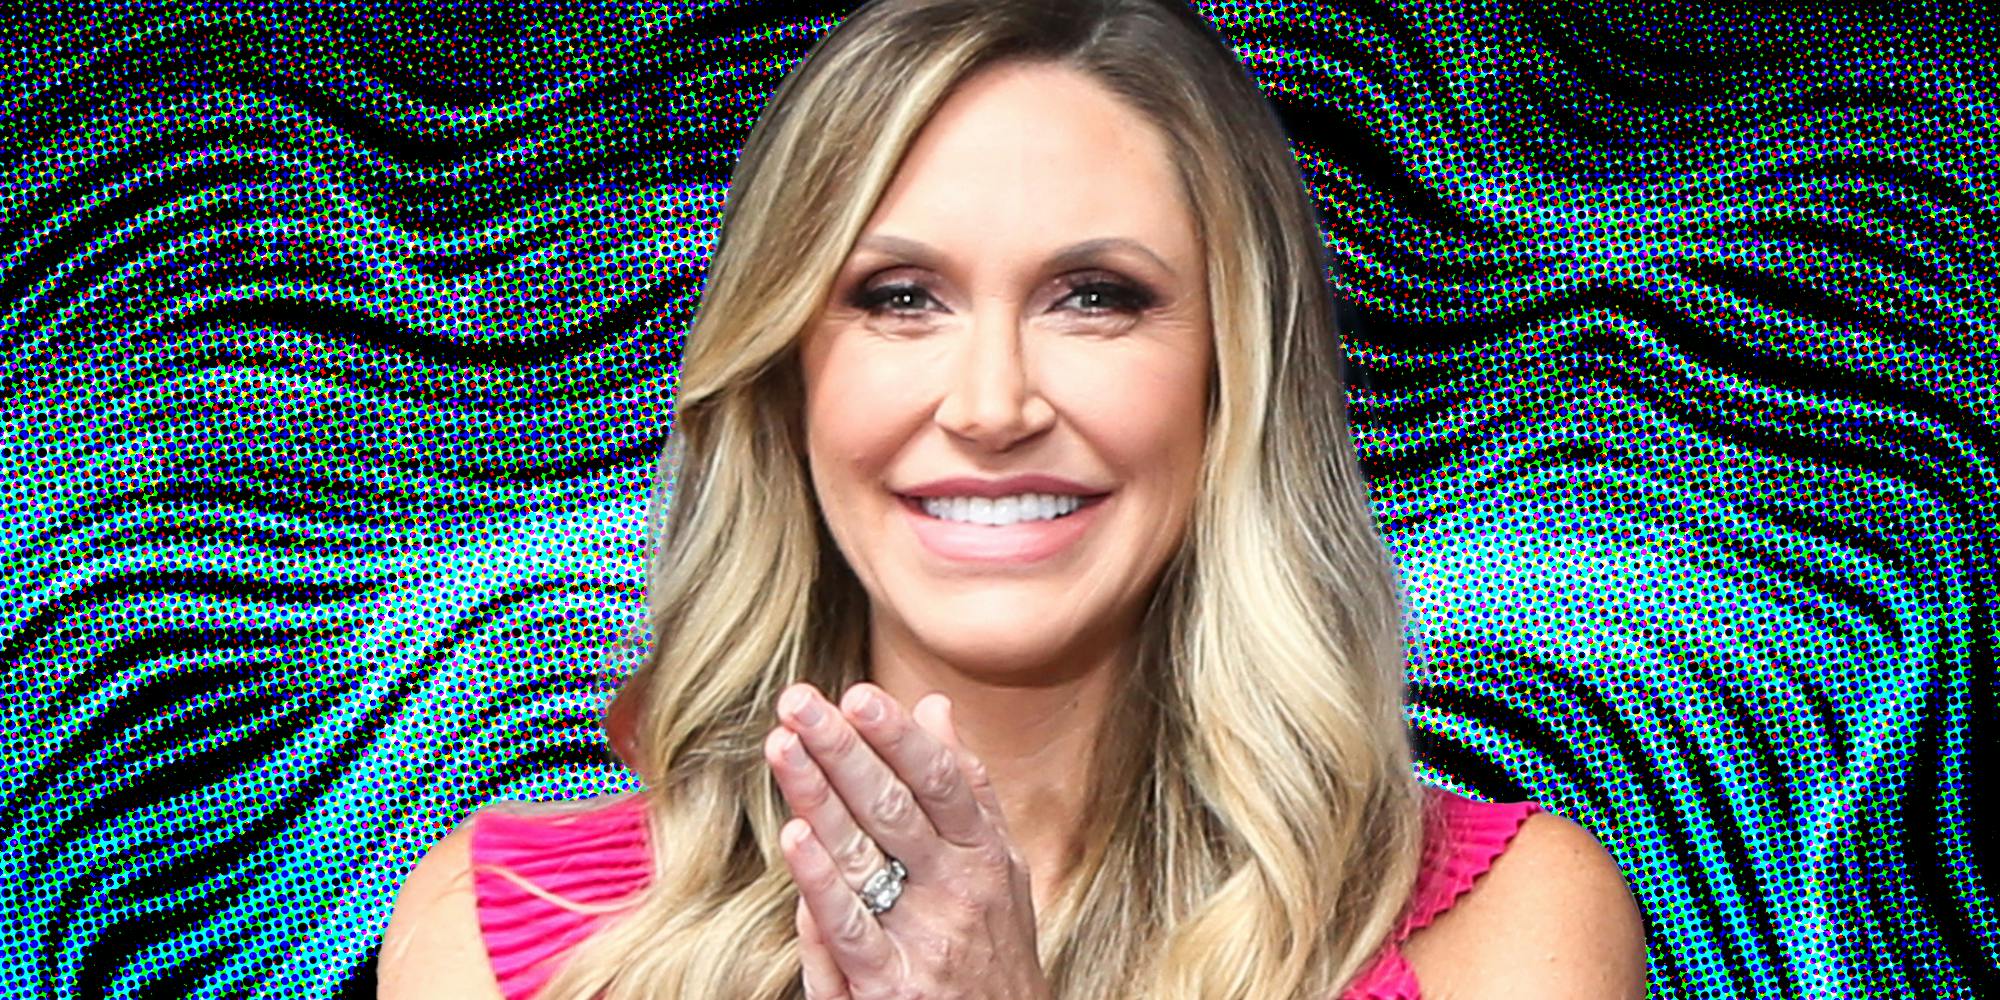 Lara Trump in front of graphic background